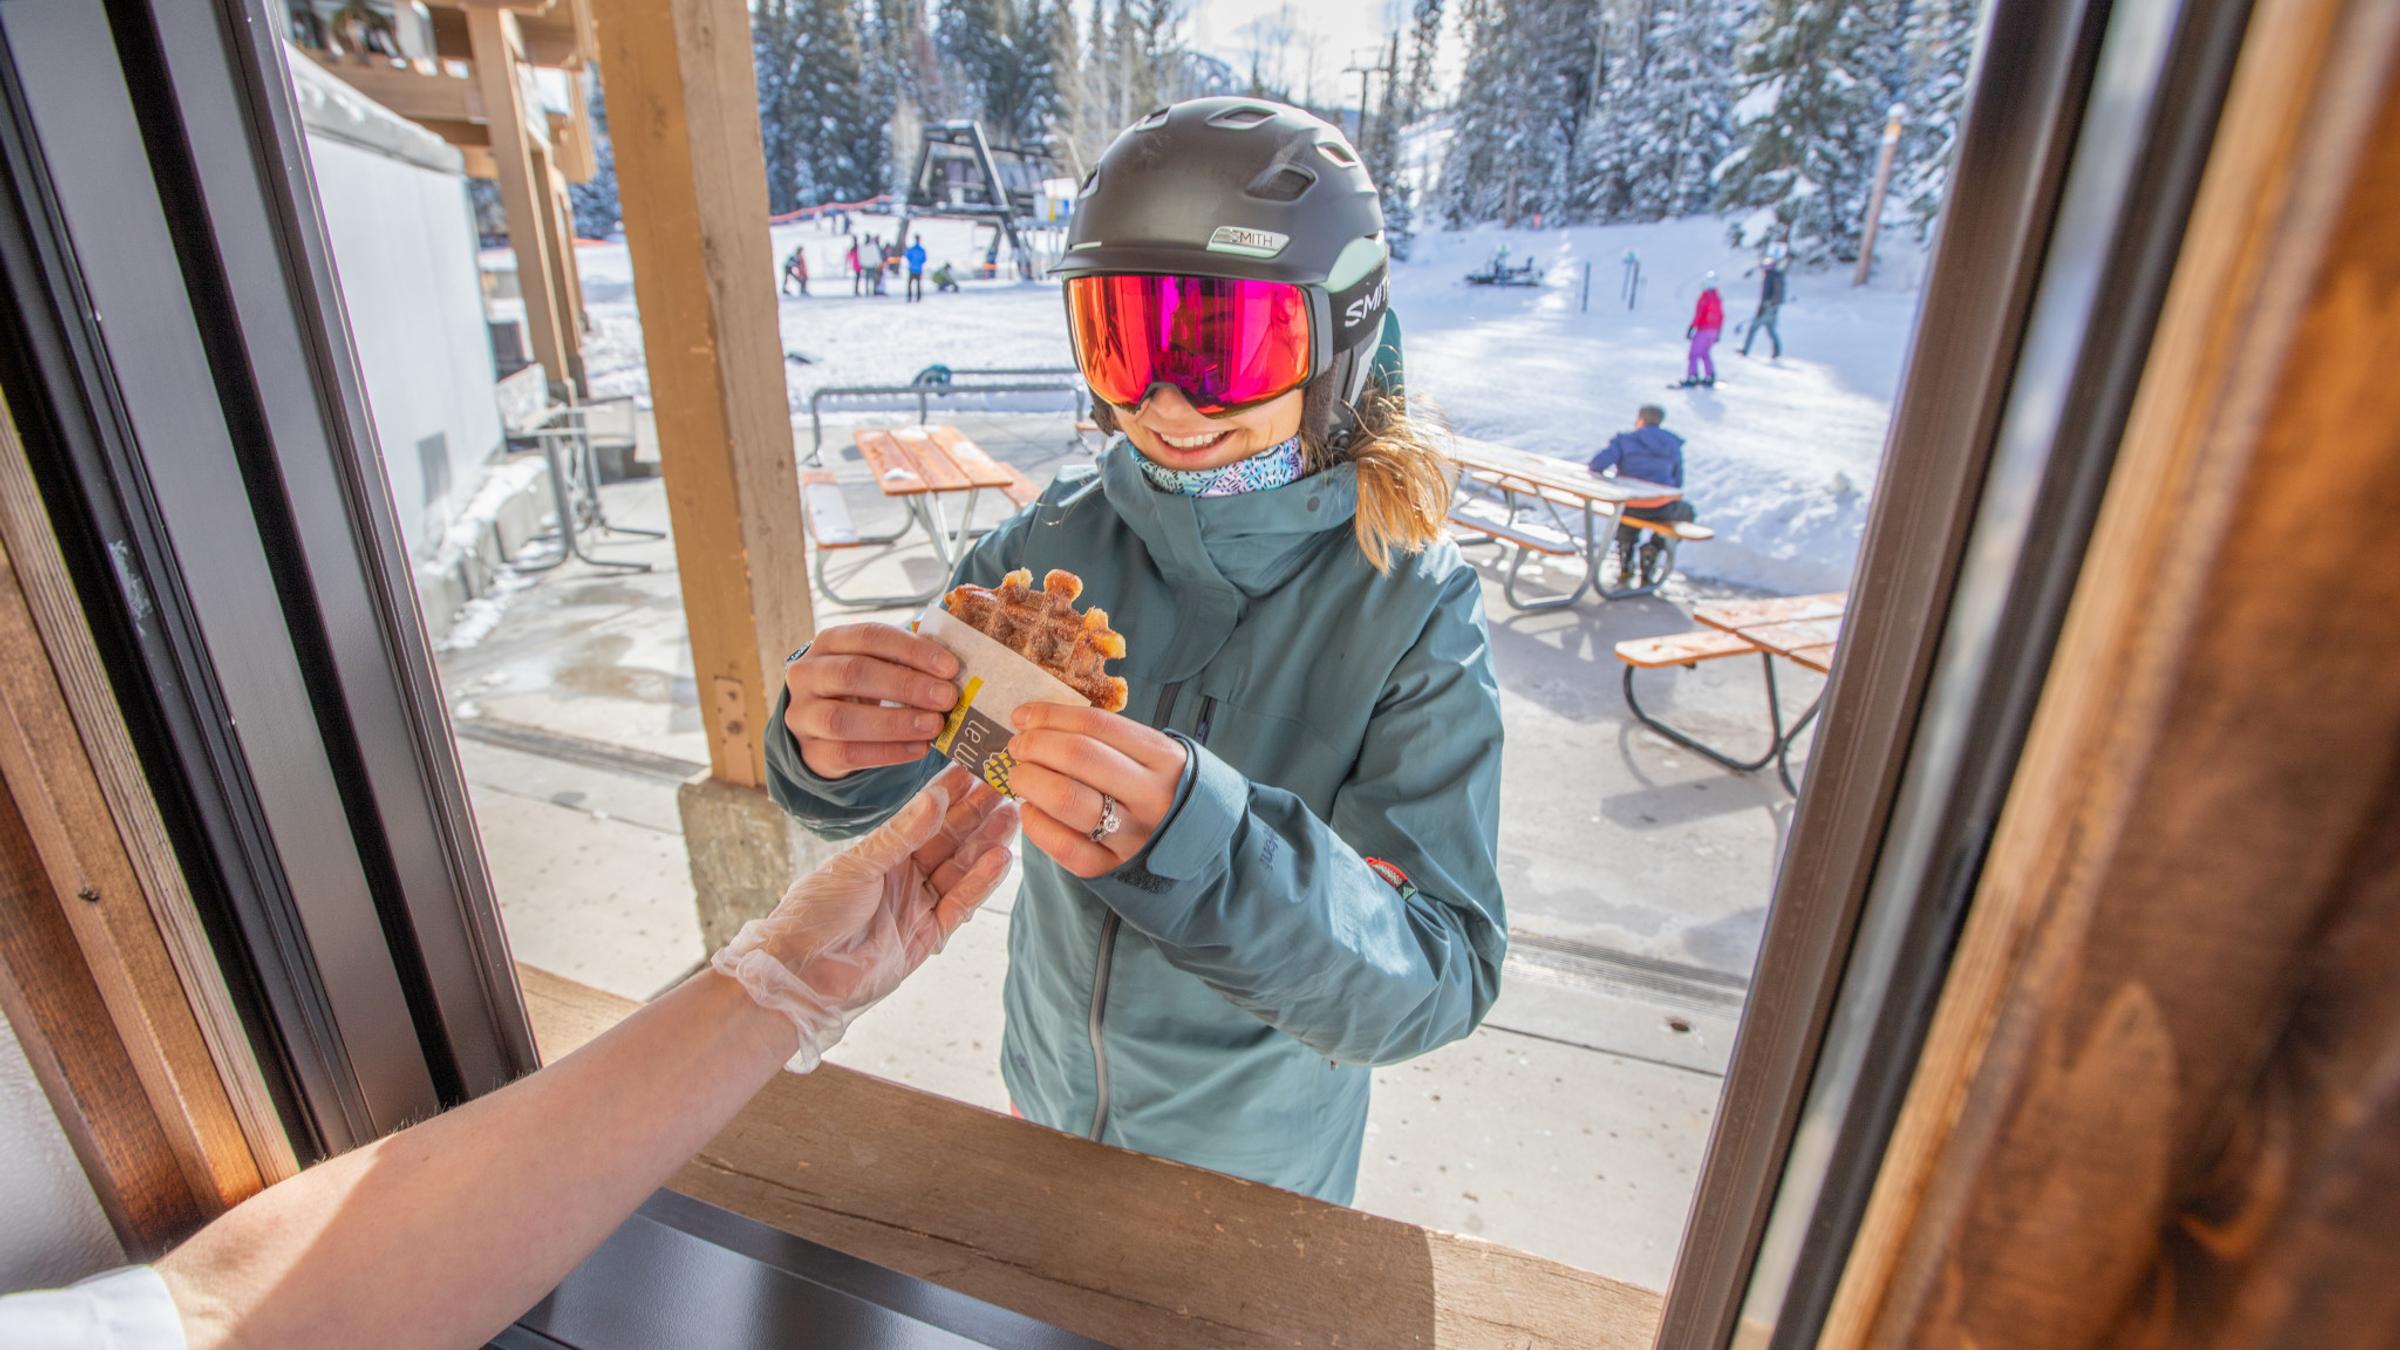 Skier receives a waffle from Little Dollie Waffle window